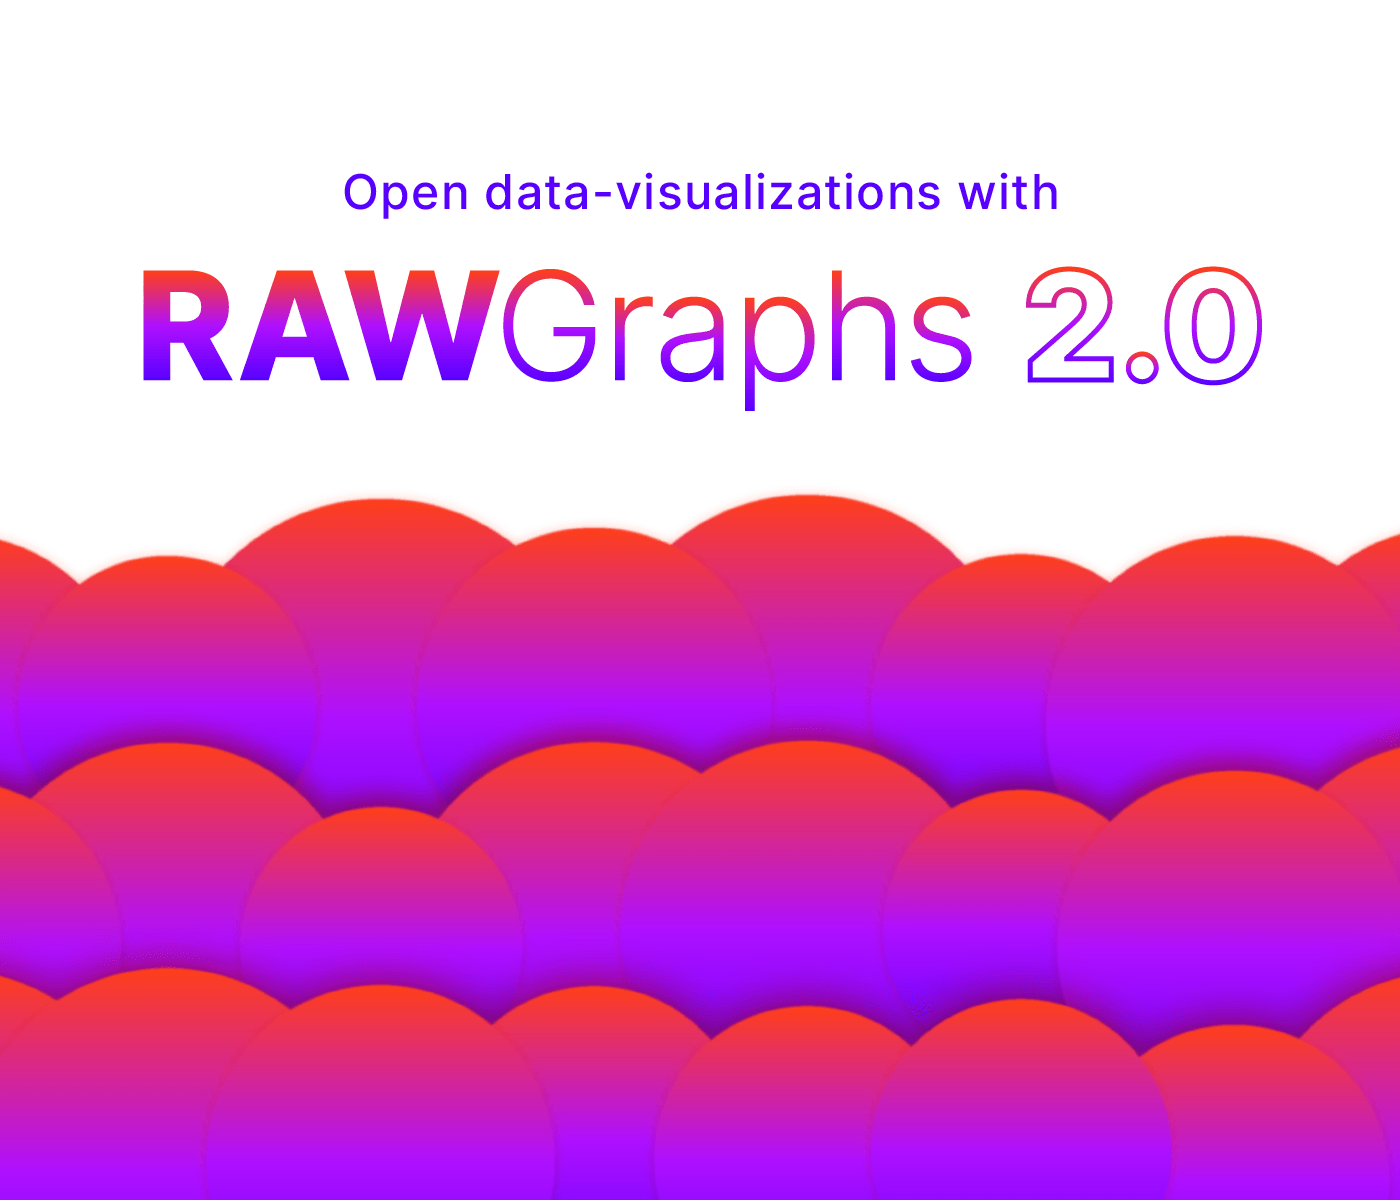 Cover for the RAWGraphs Workshop